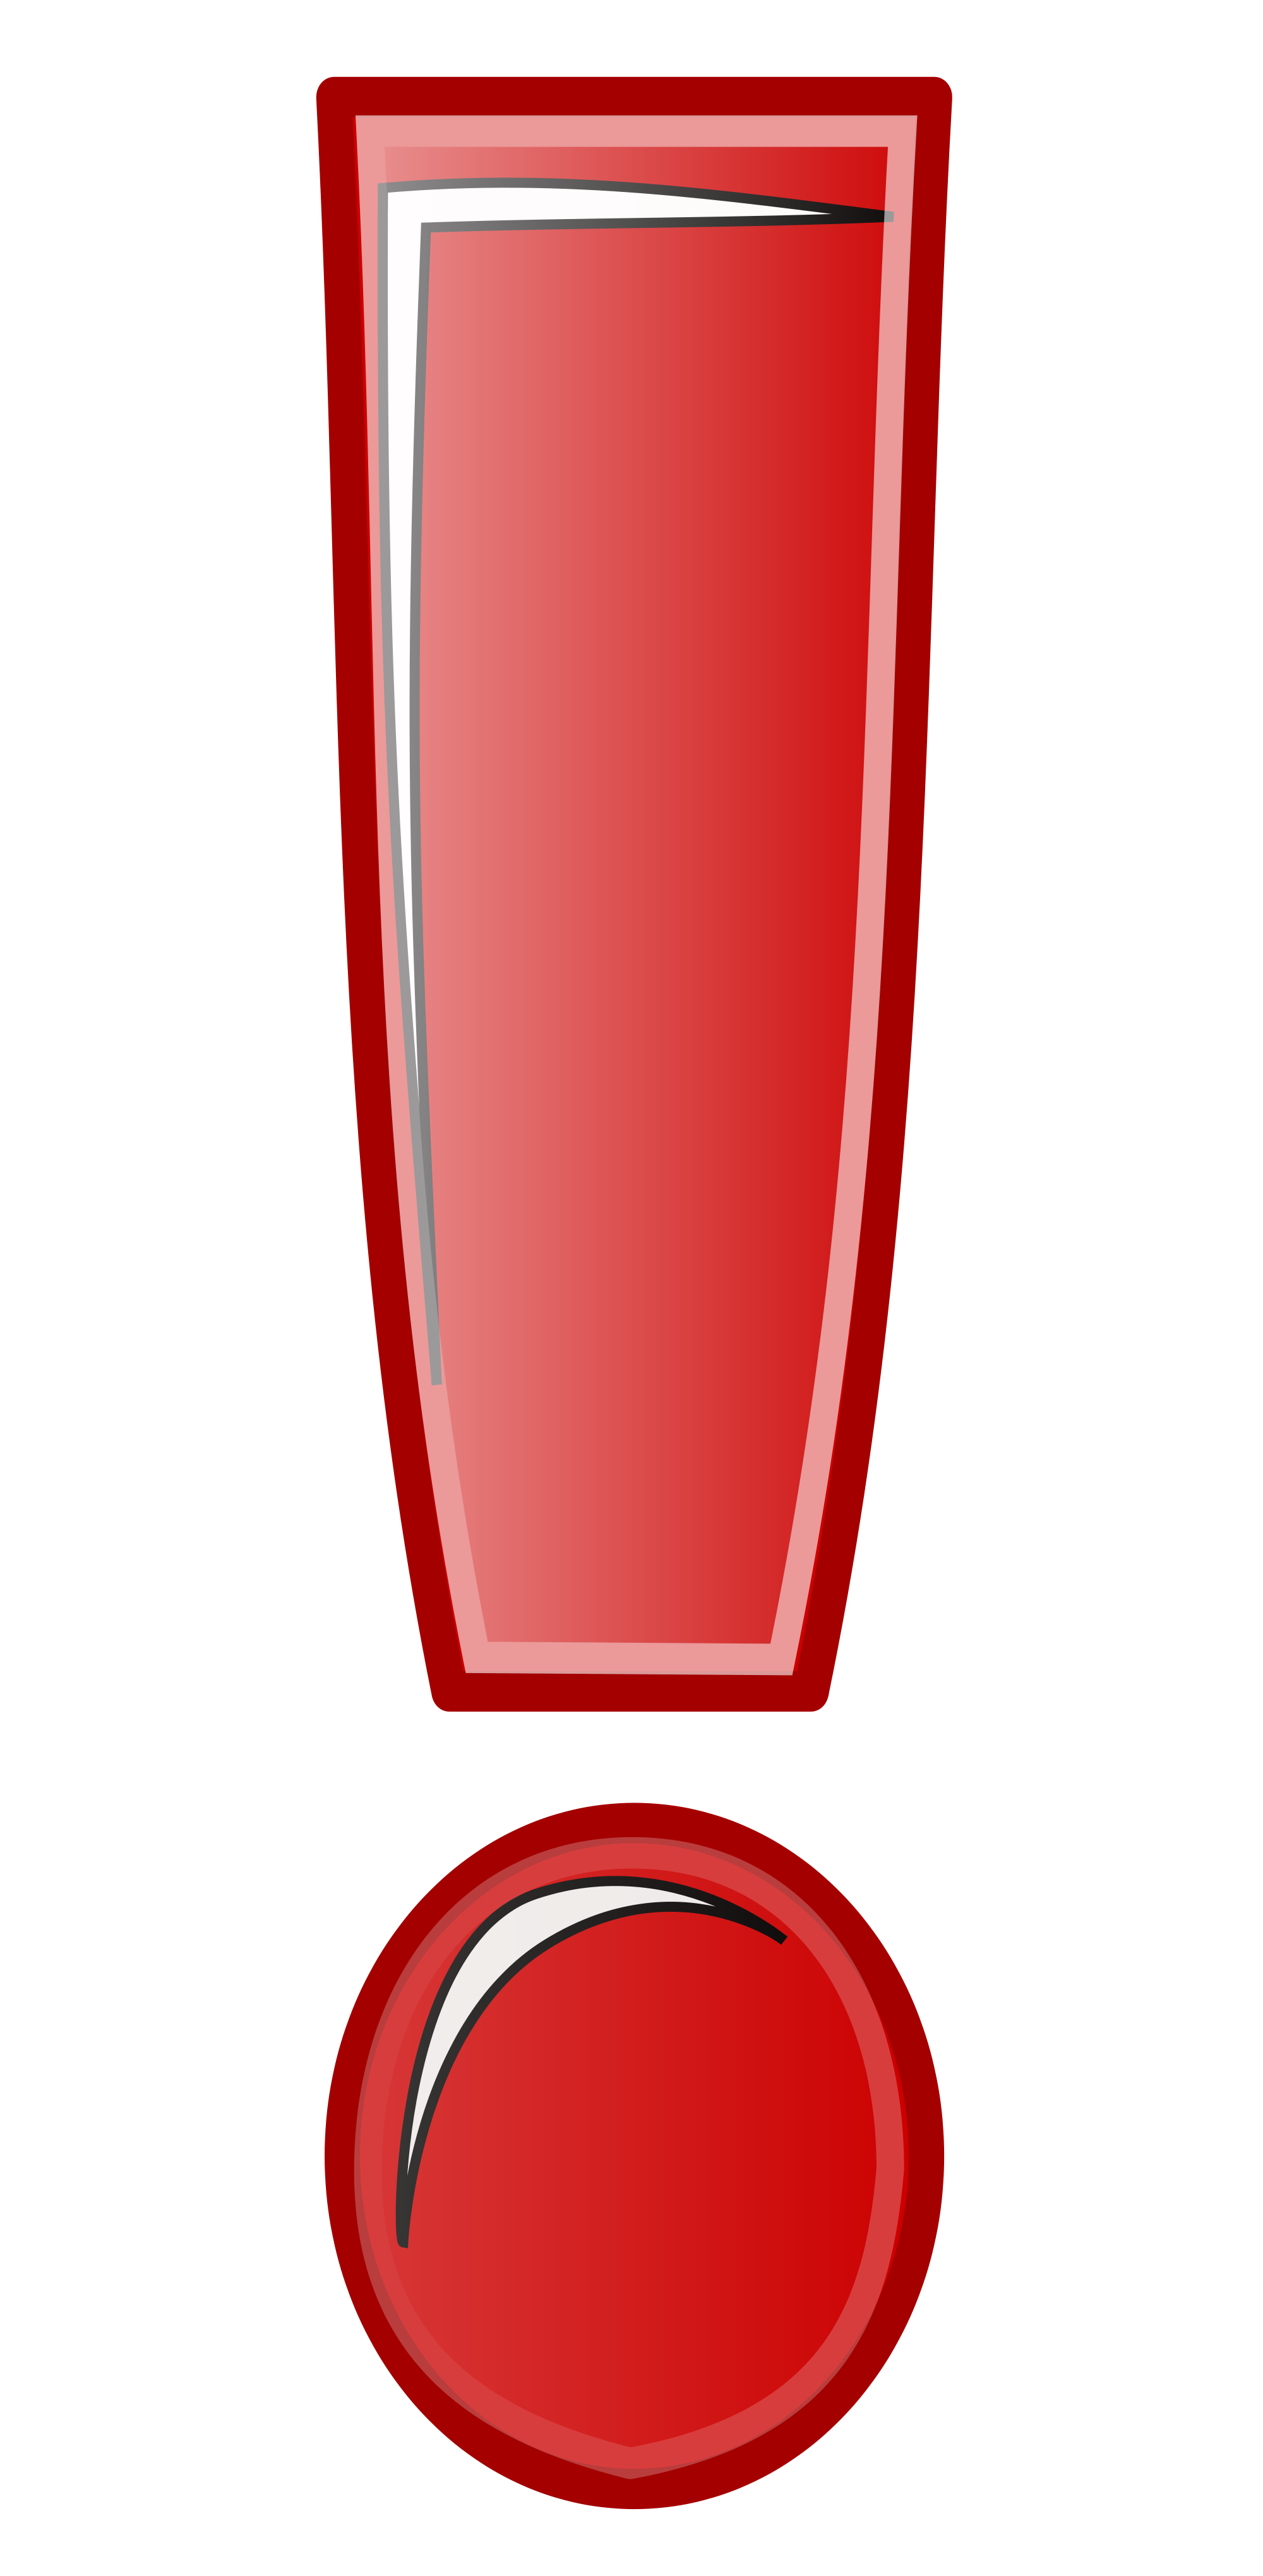 Exclamation Mark PNG Image